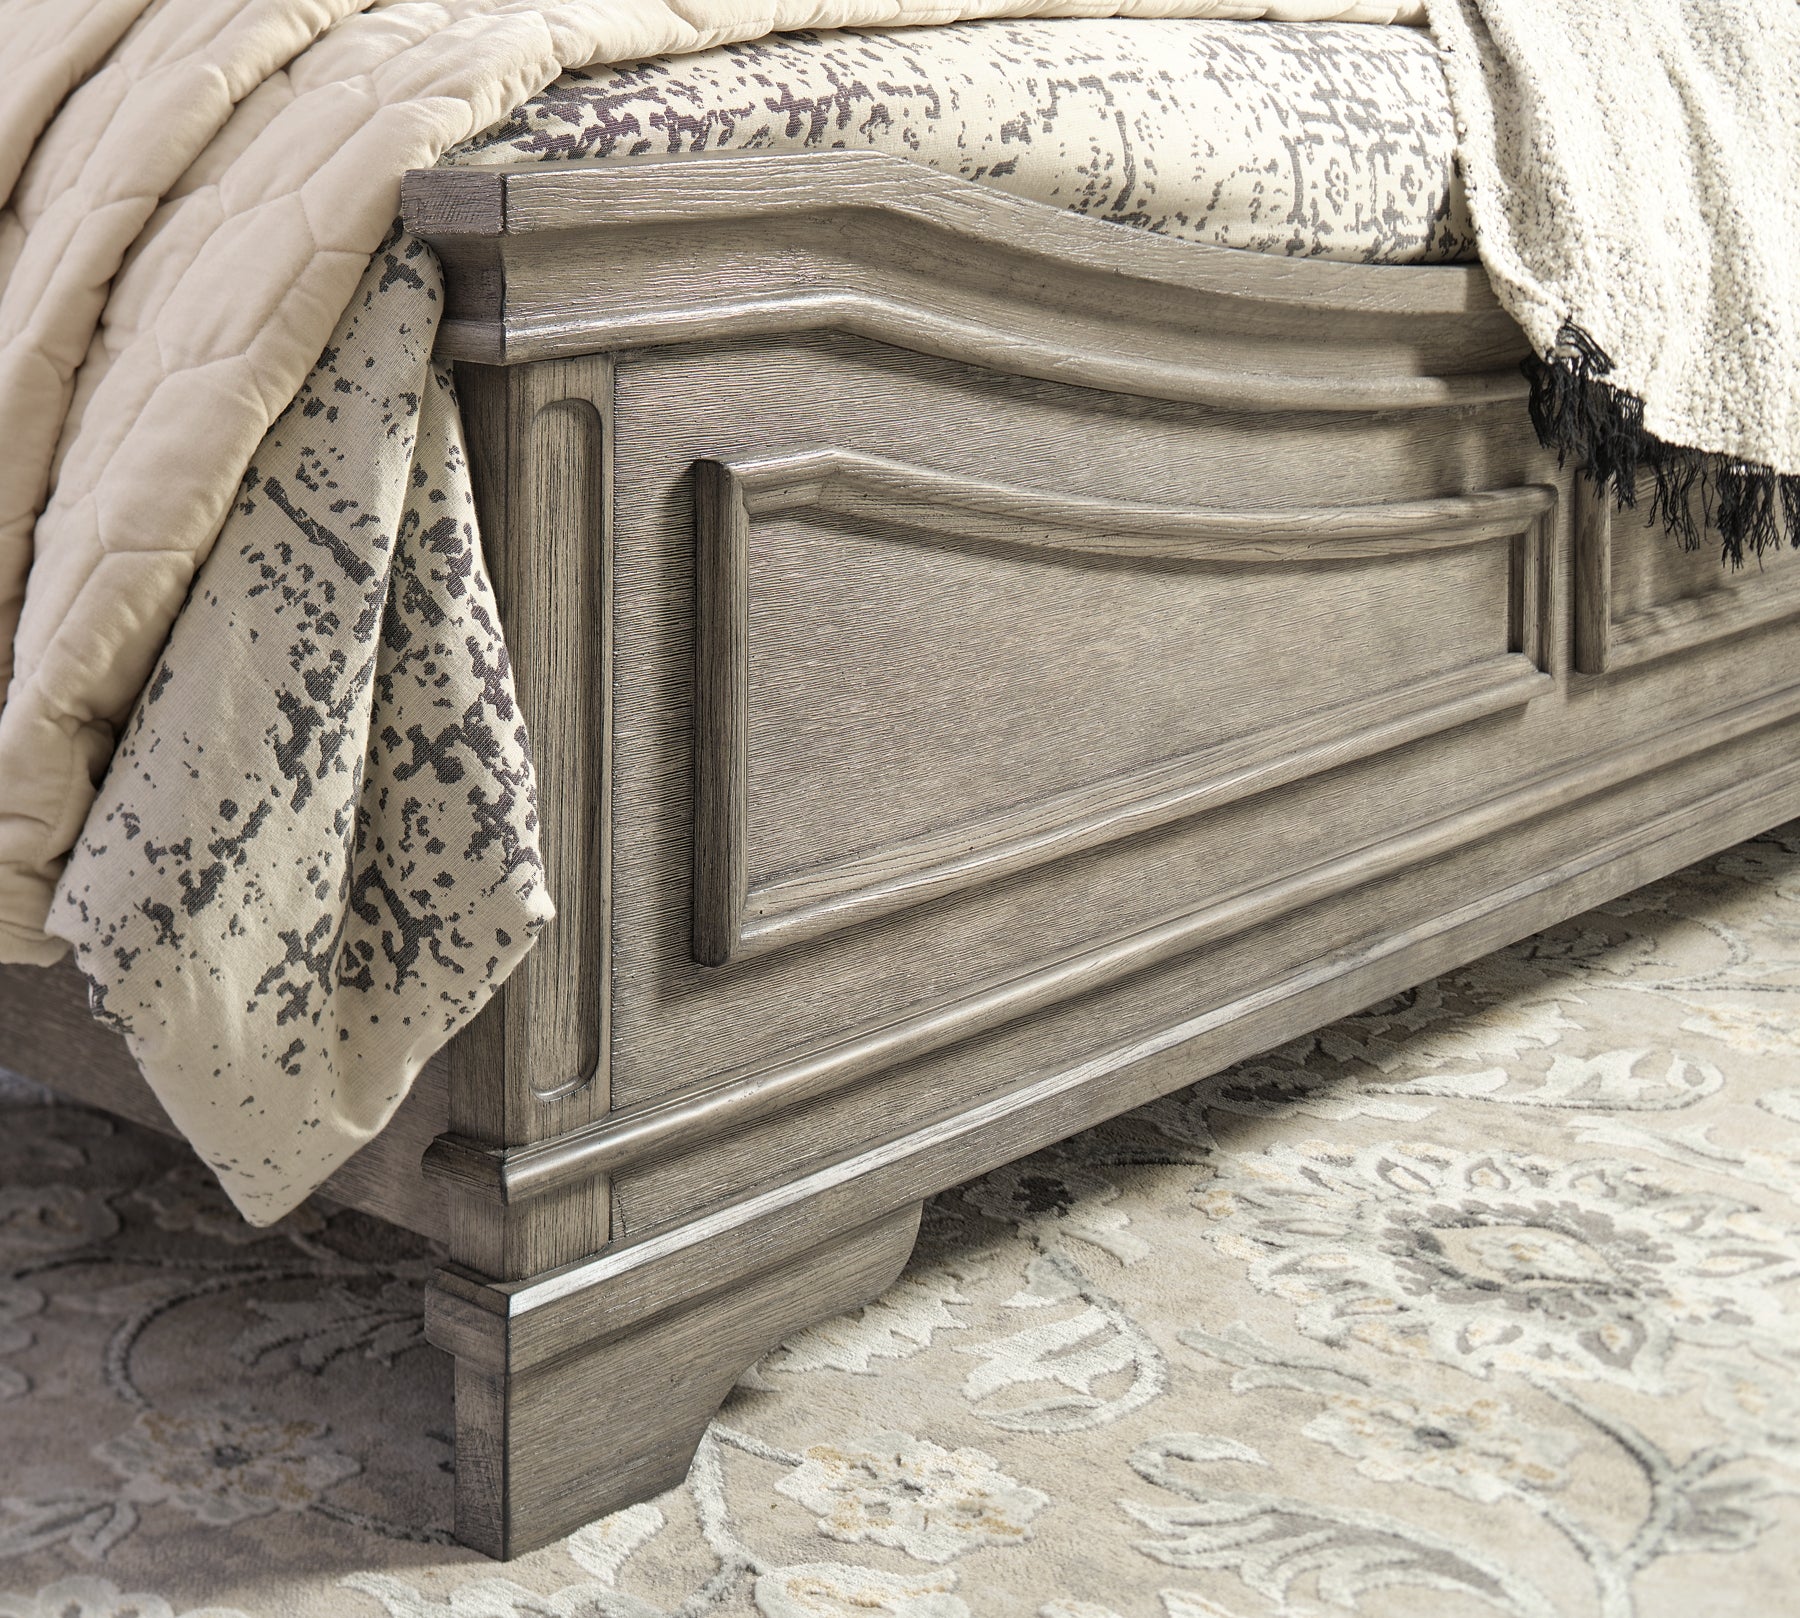 Lodenbay Queen Panel Bed Signature Design by Ashley®